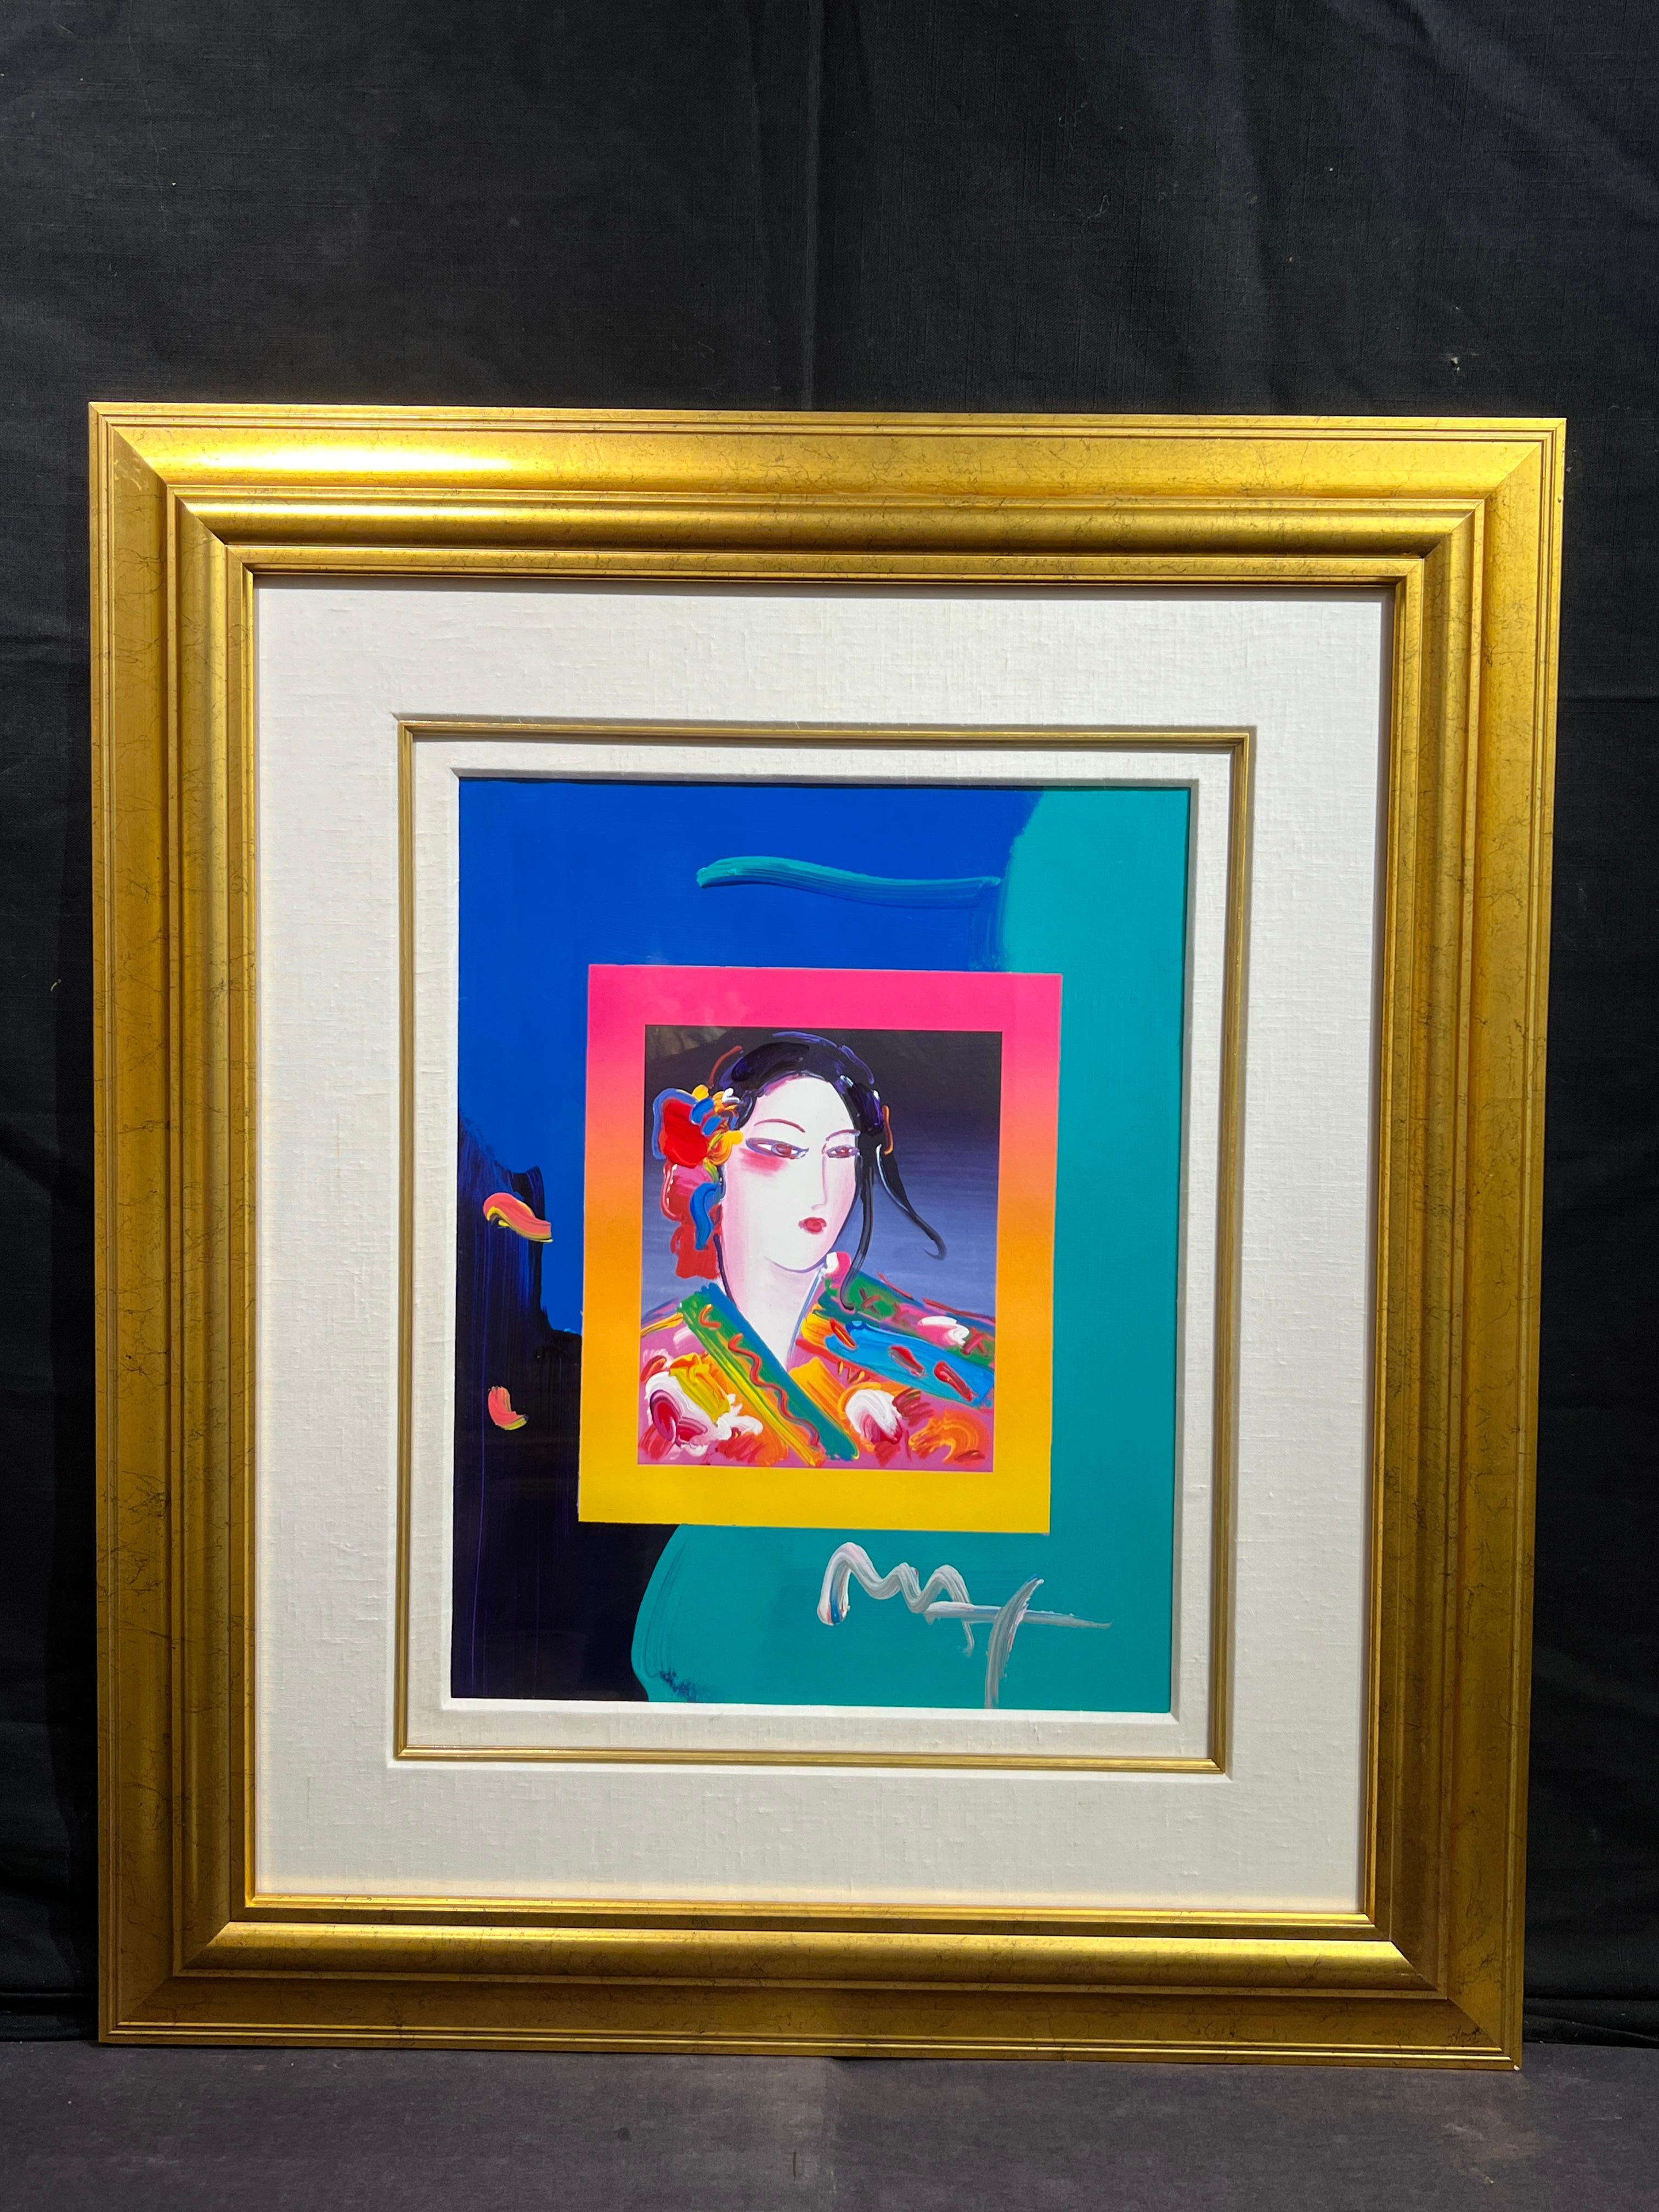 Peter Max (German, b. 1937)
Asia on Blends
Signed Lower Right
18 x 14 inches
32.5 x 28.5 inches with frame

Peter Max, born Peter Max Finkelstein,  is a multi-dimensional artist focused on contemporary events.  When he left art school in the 1960s